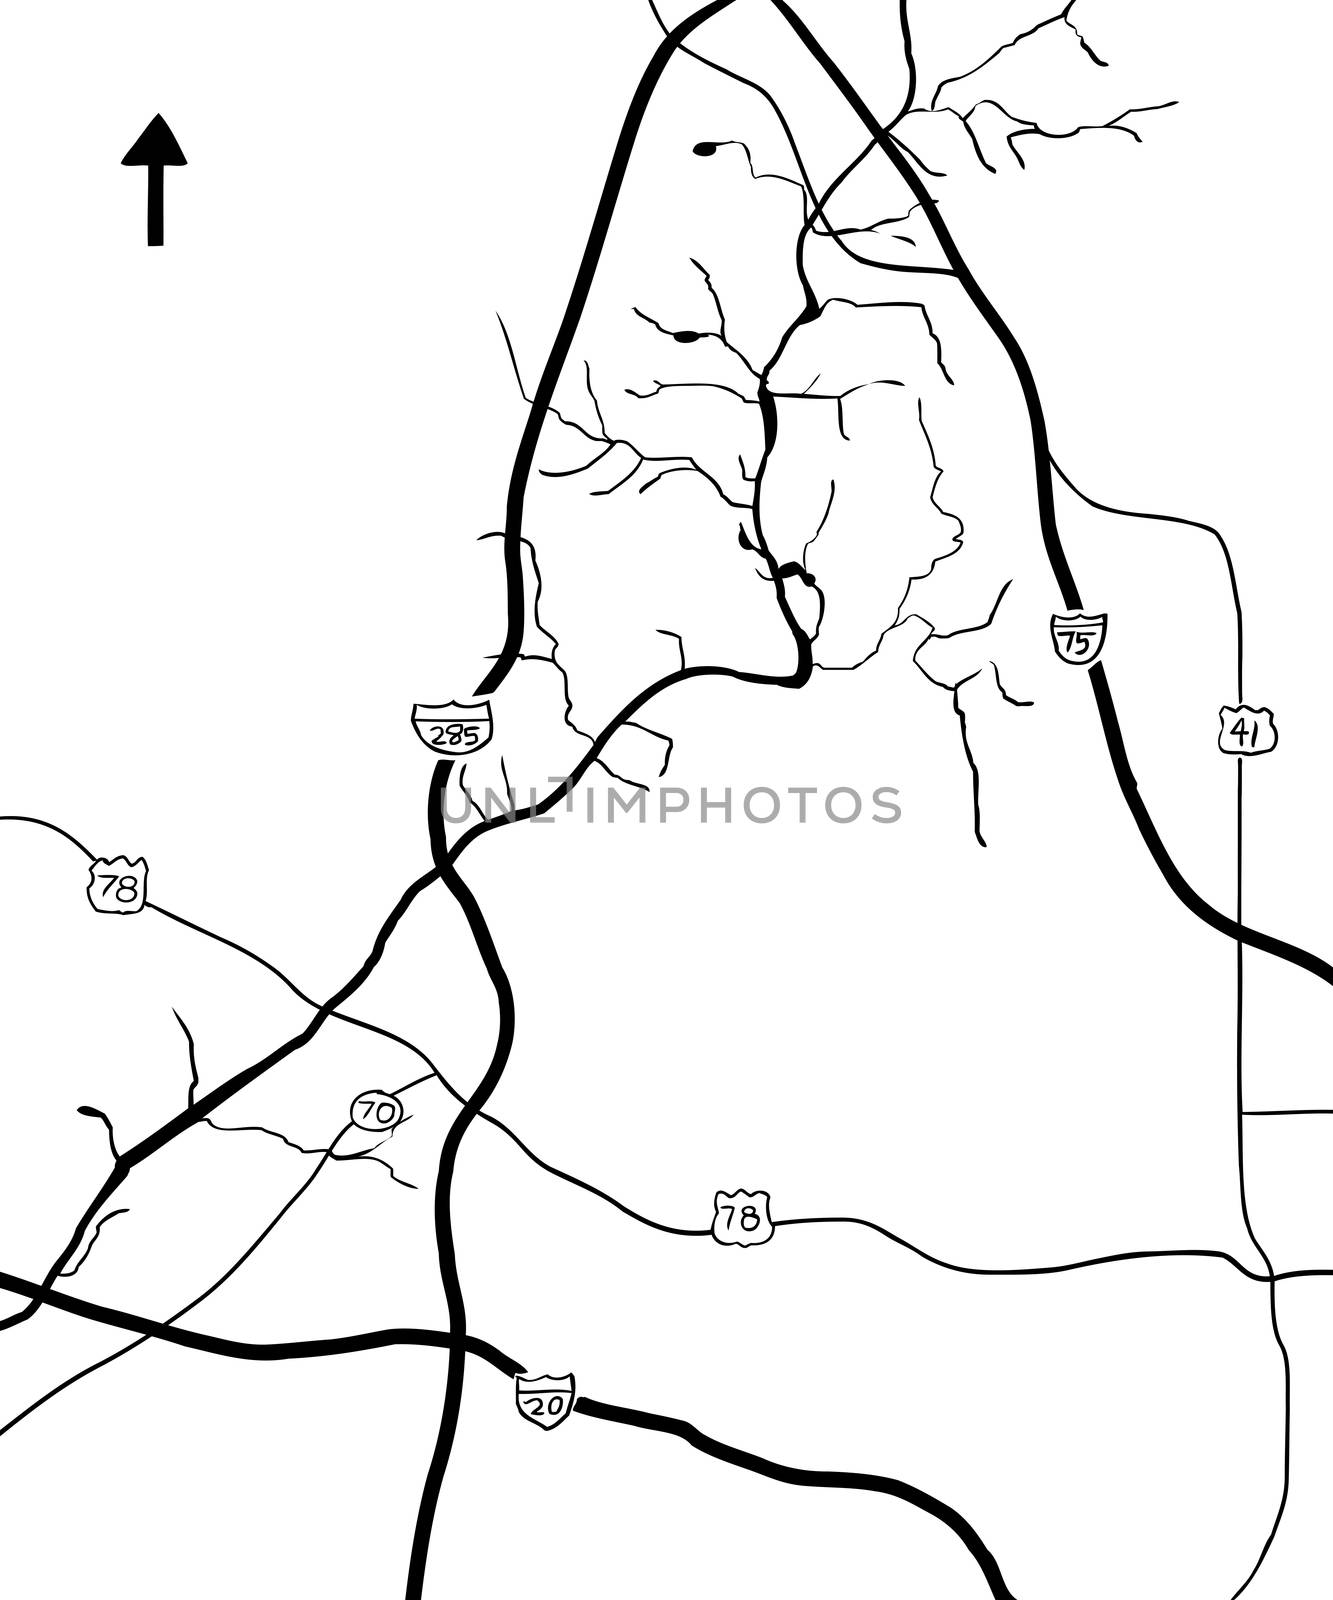 Chattahoochee River and various highways on outline map of Georgia, USA